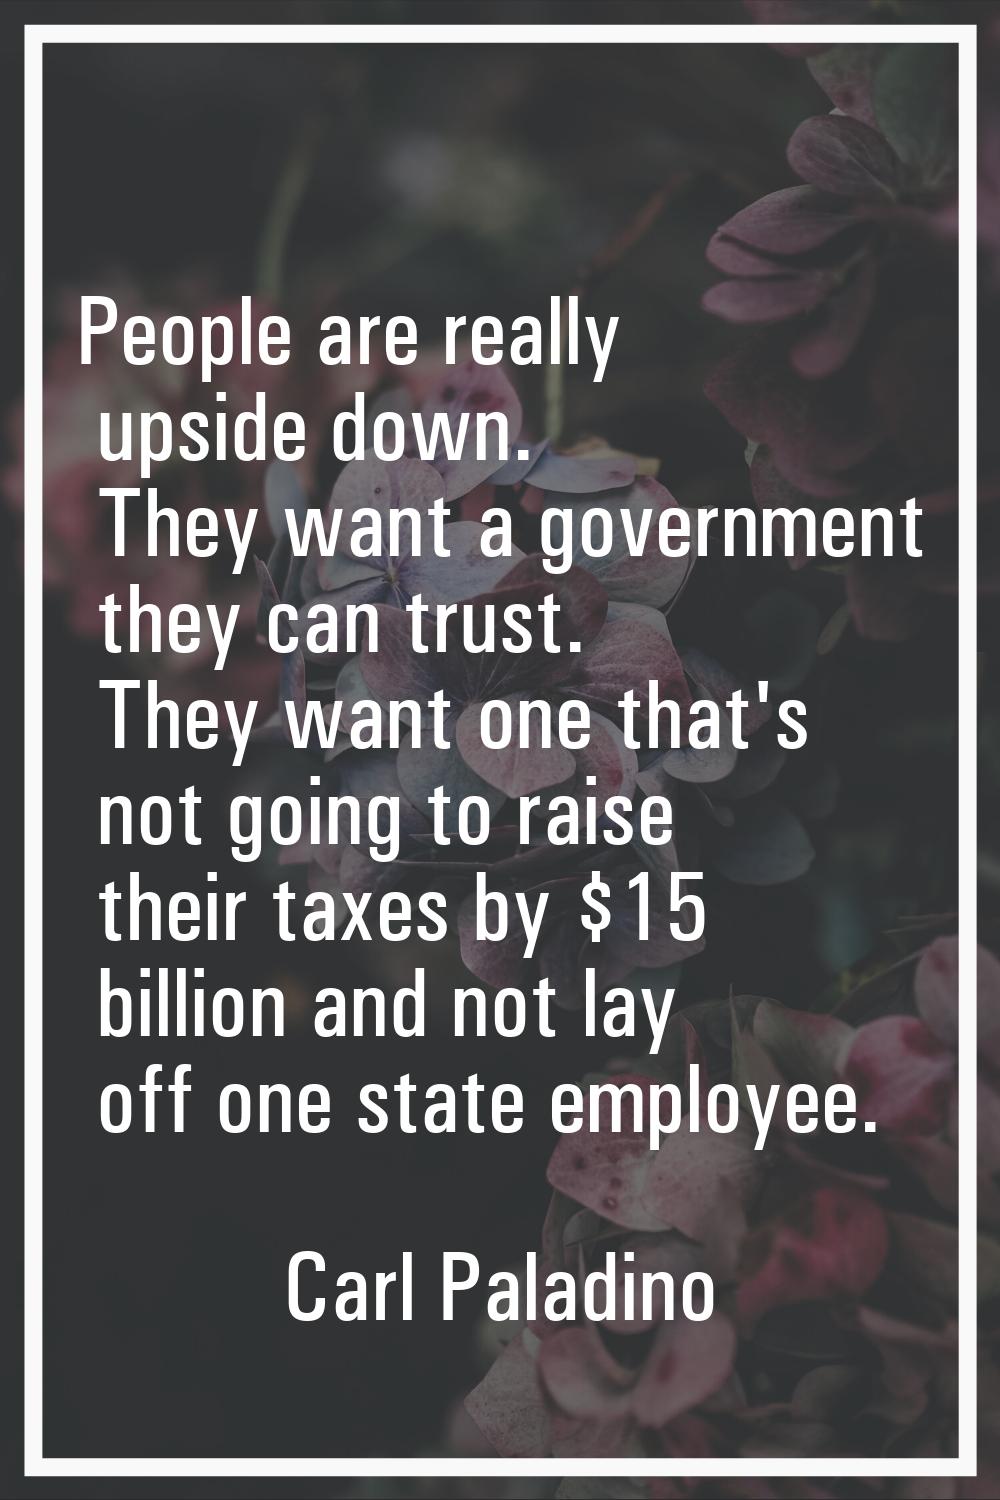 People are really upside down. They want a government they can trust. They want one that's not goin